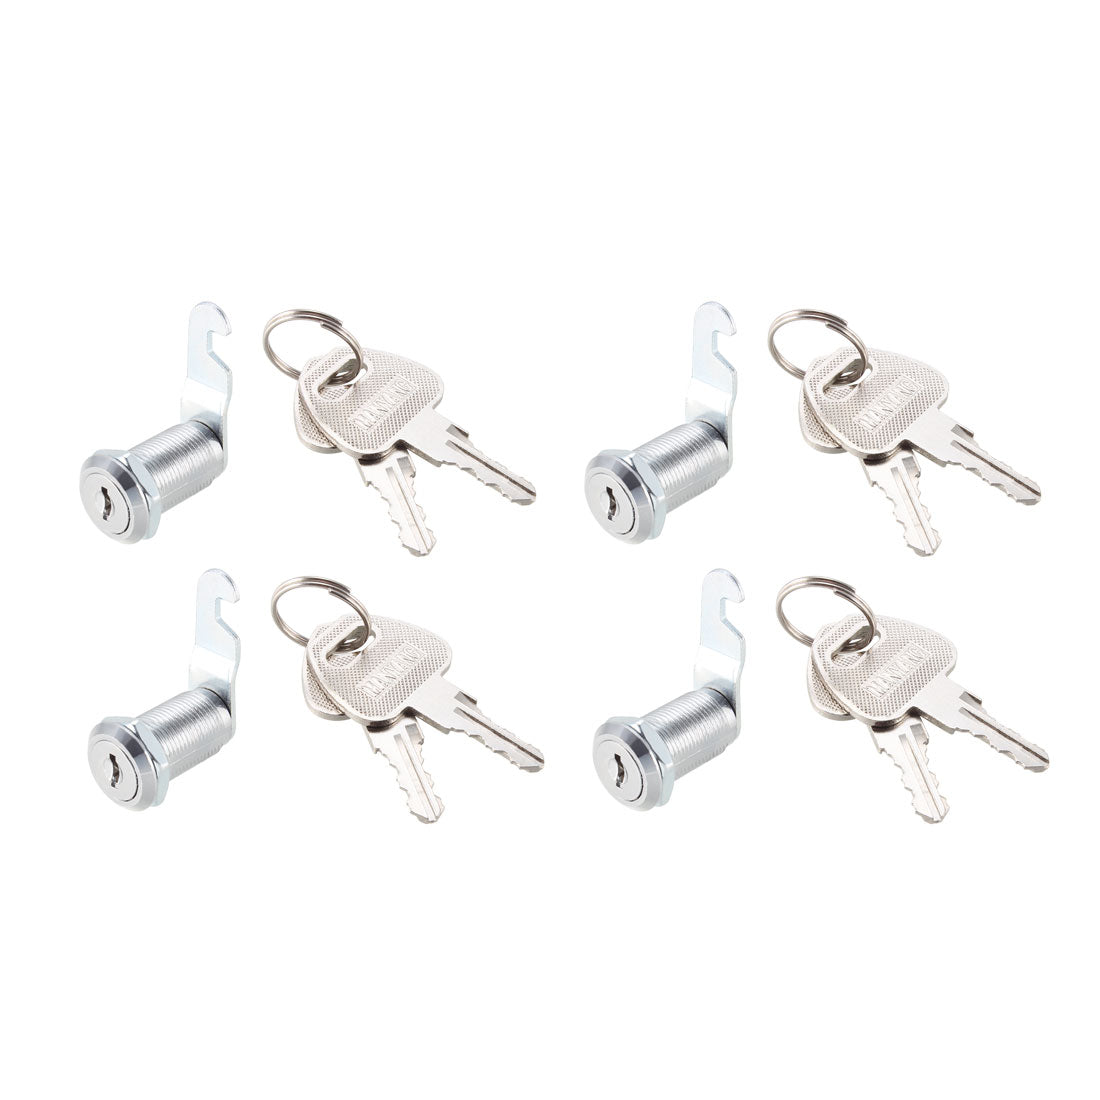 uxcell Uxcell Cam Locks 30mm Cylinder Length for Max 7/8-inch Thick Panel Keyed Alike 4Pcs